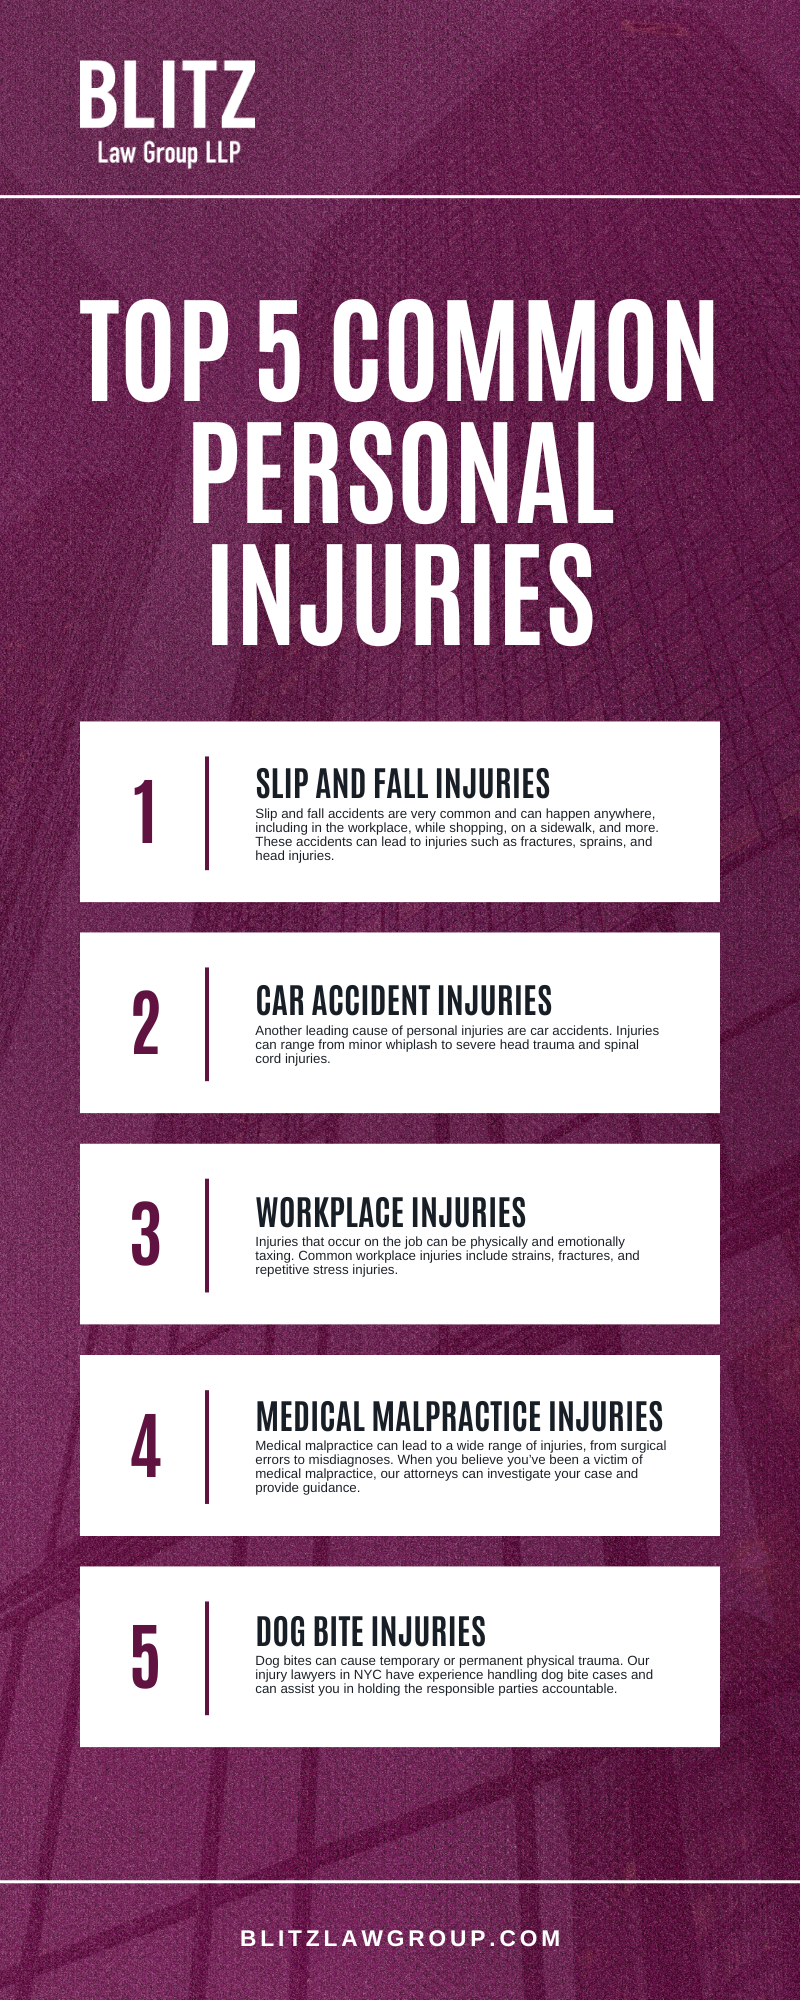 Top 5 Common Personal Injuries Infographic